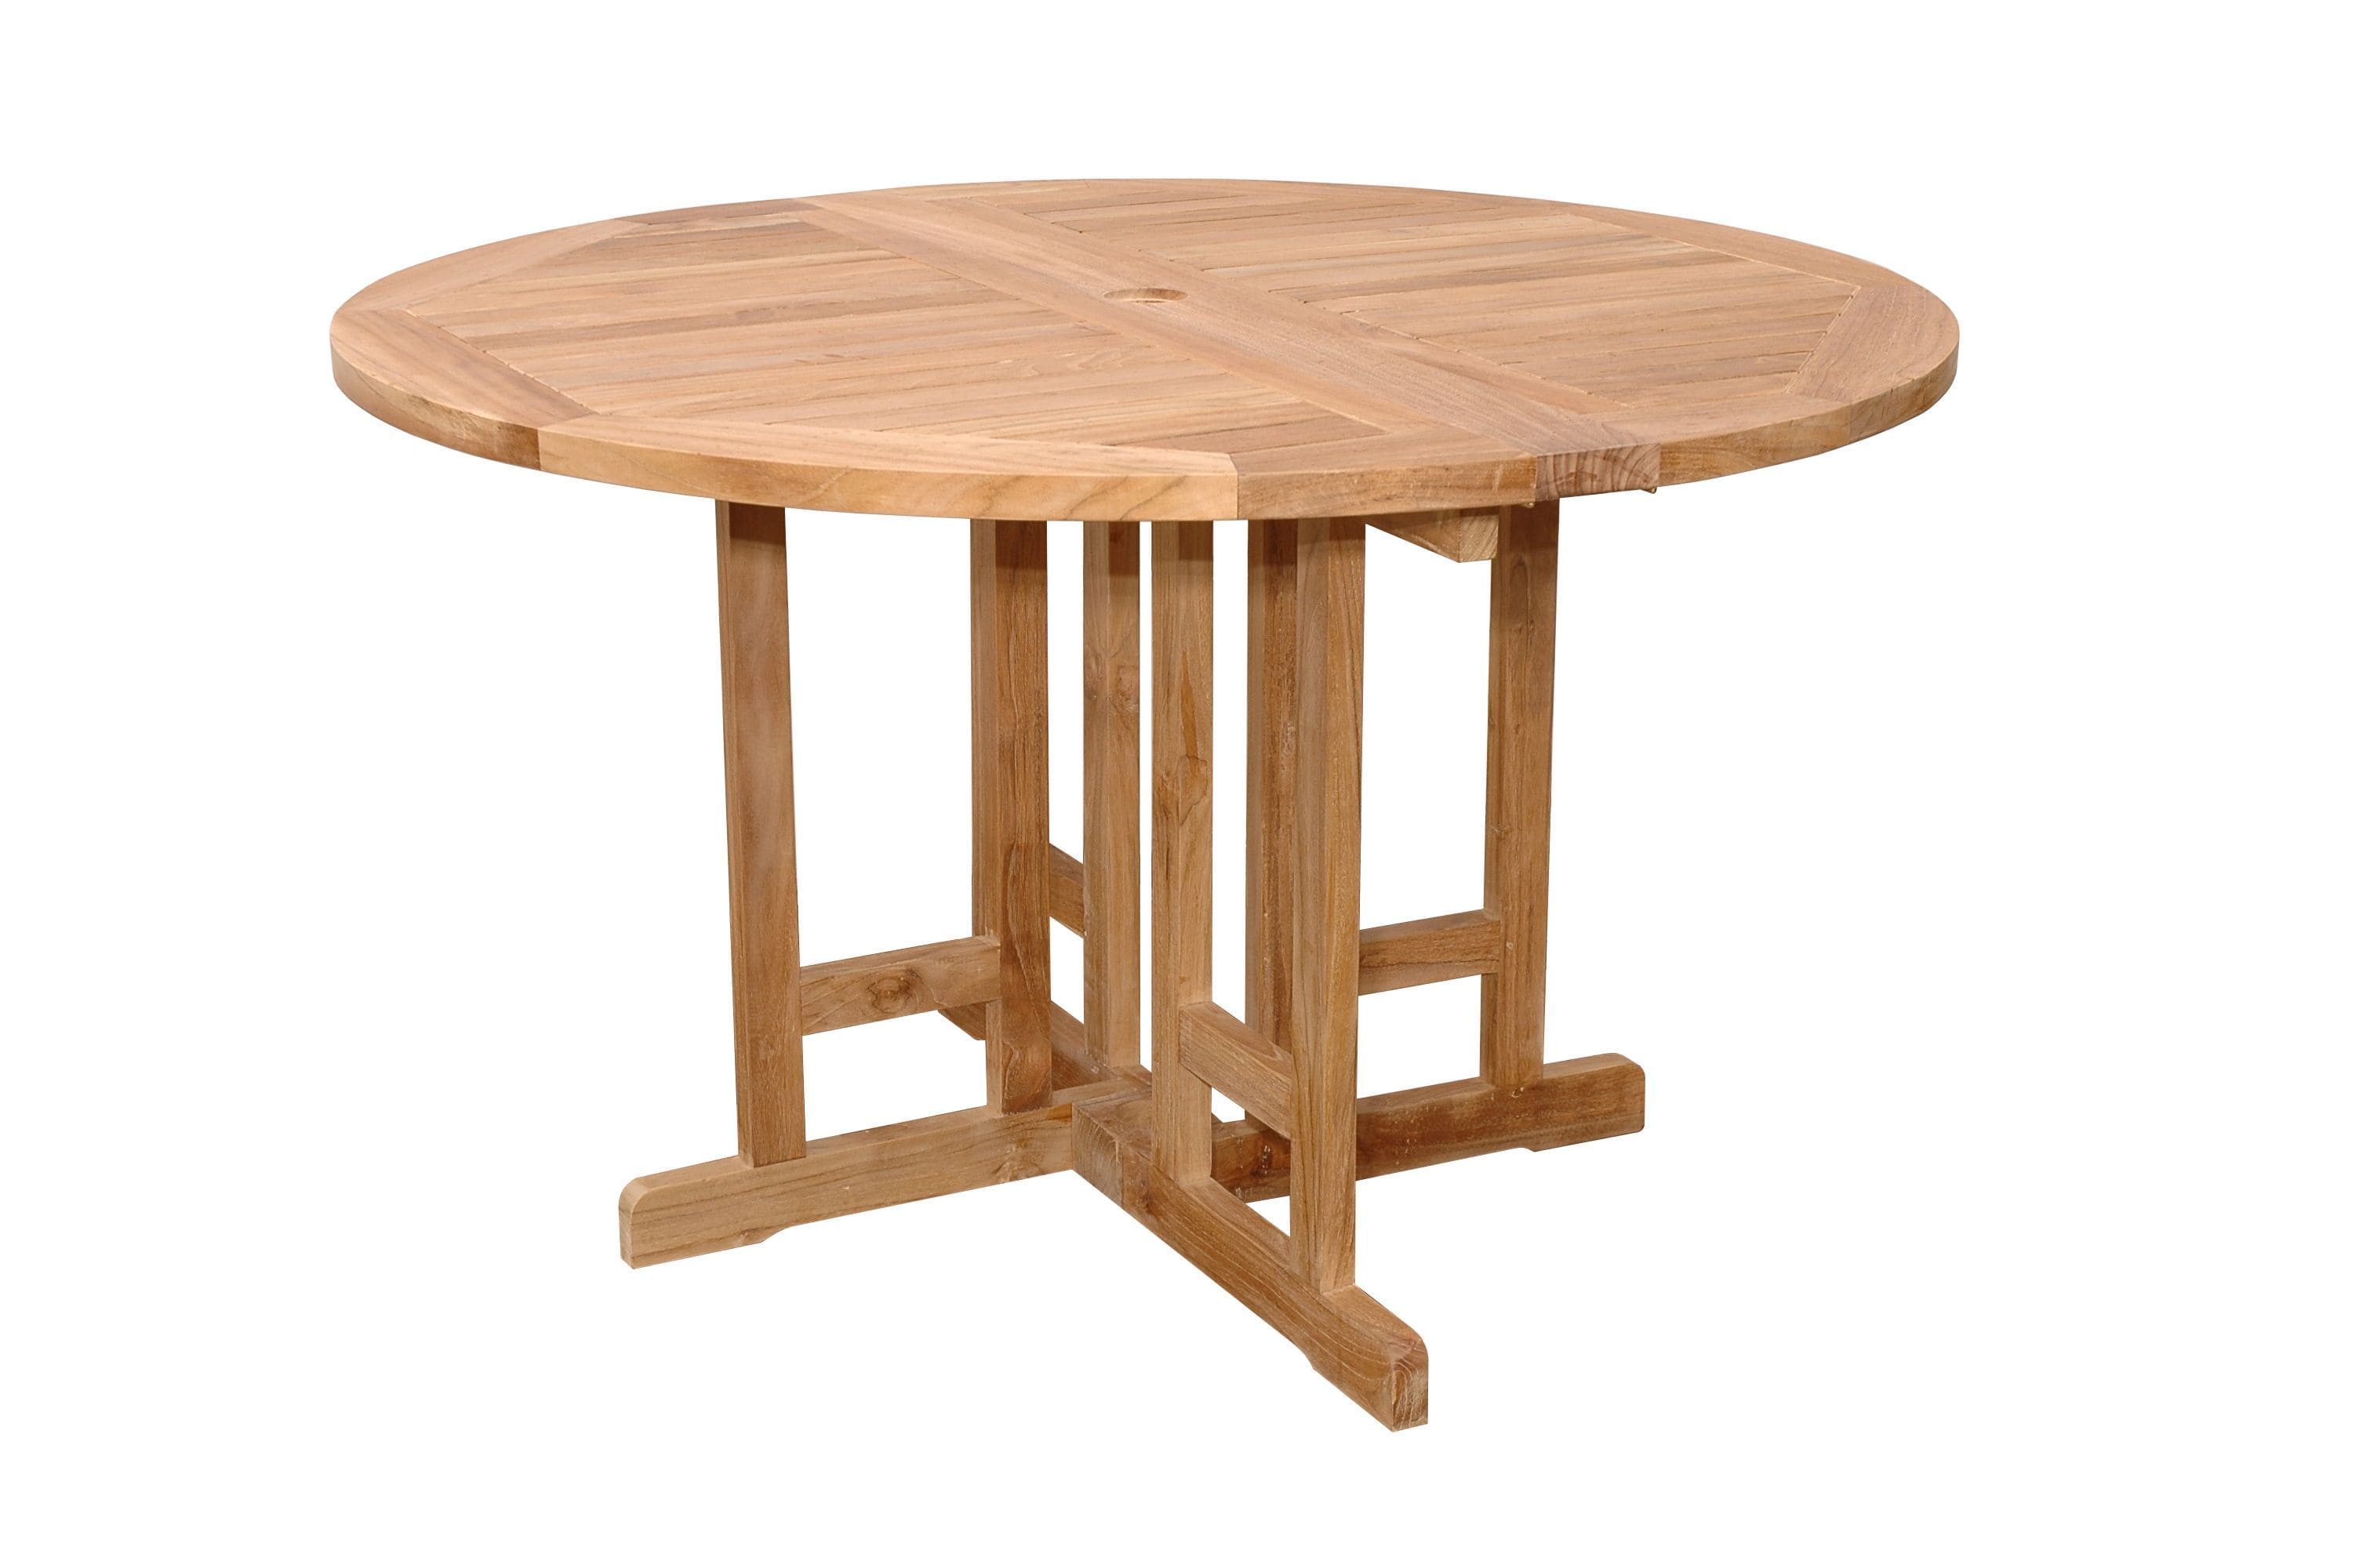 Anderson Teak Outdoor Dining Table Anderson Teak Butterfly 47" Round Folding Table